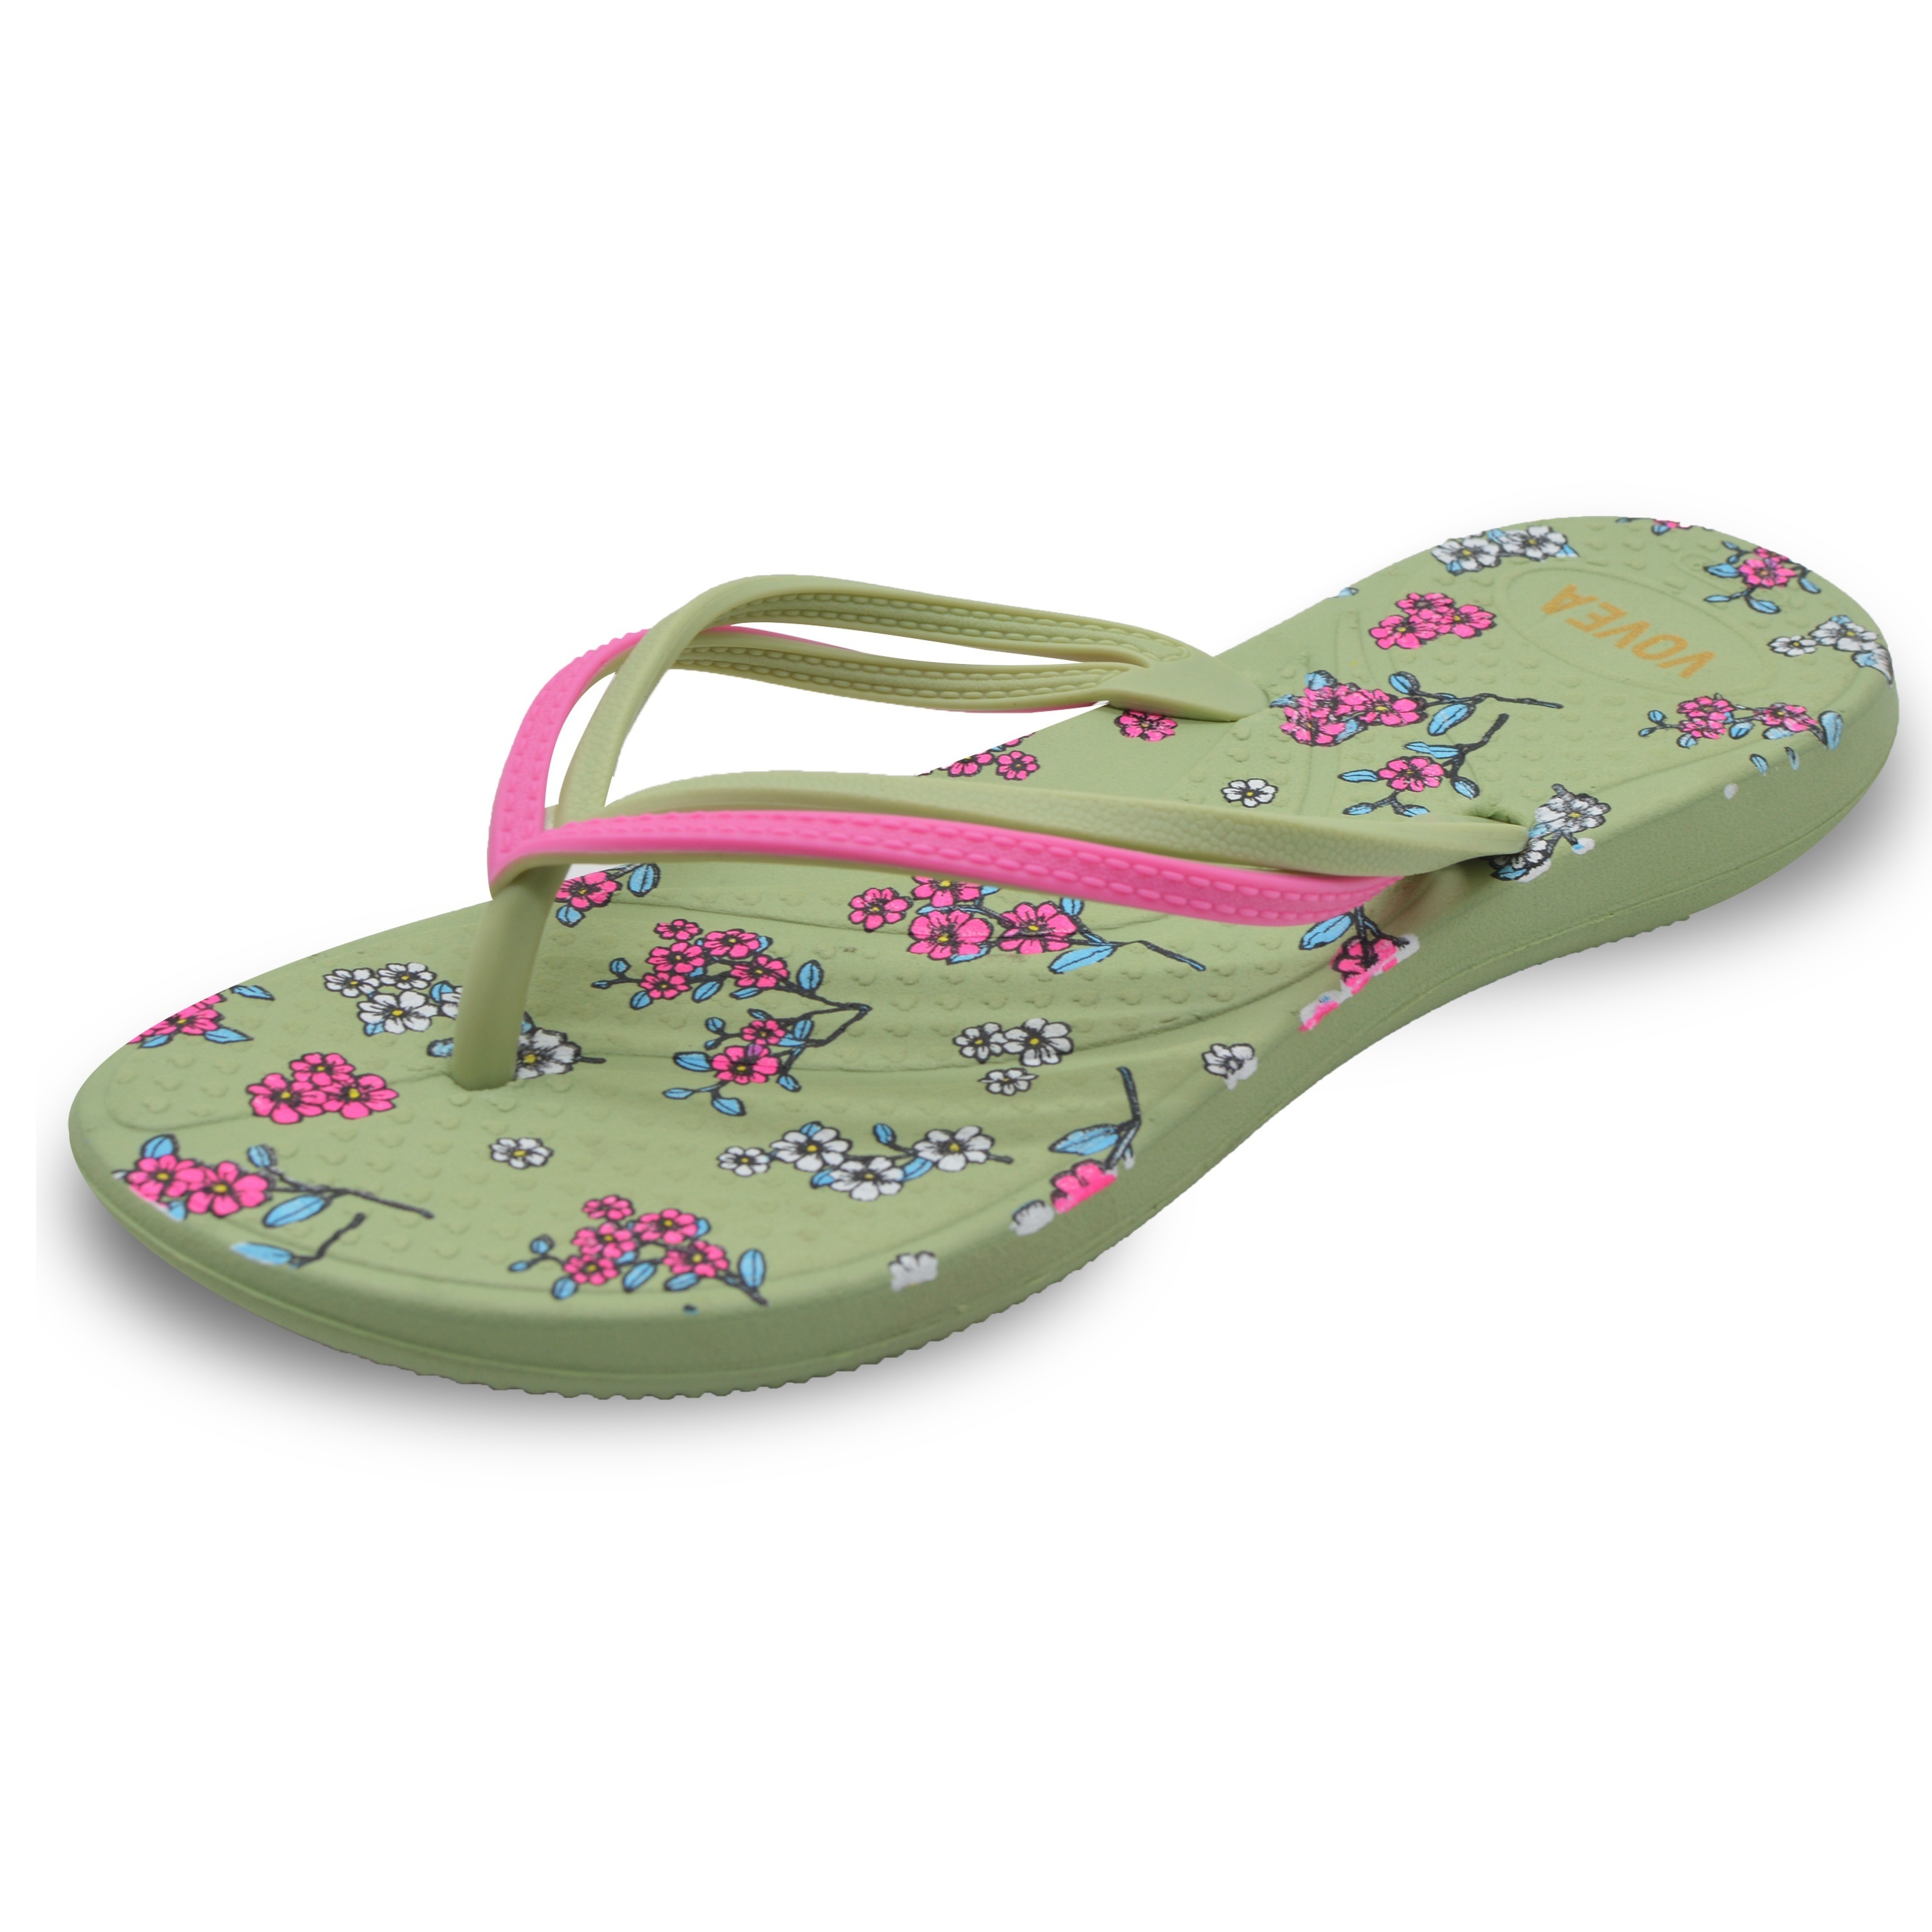 Fancy Pink Color Ladies Slippers Hawai Chappal For Women And Bathroom  Slipper Outdoor & Indoor wear